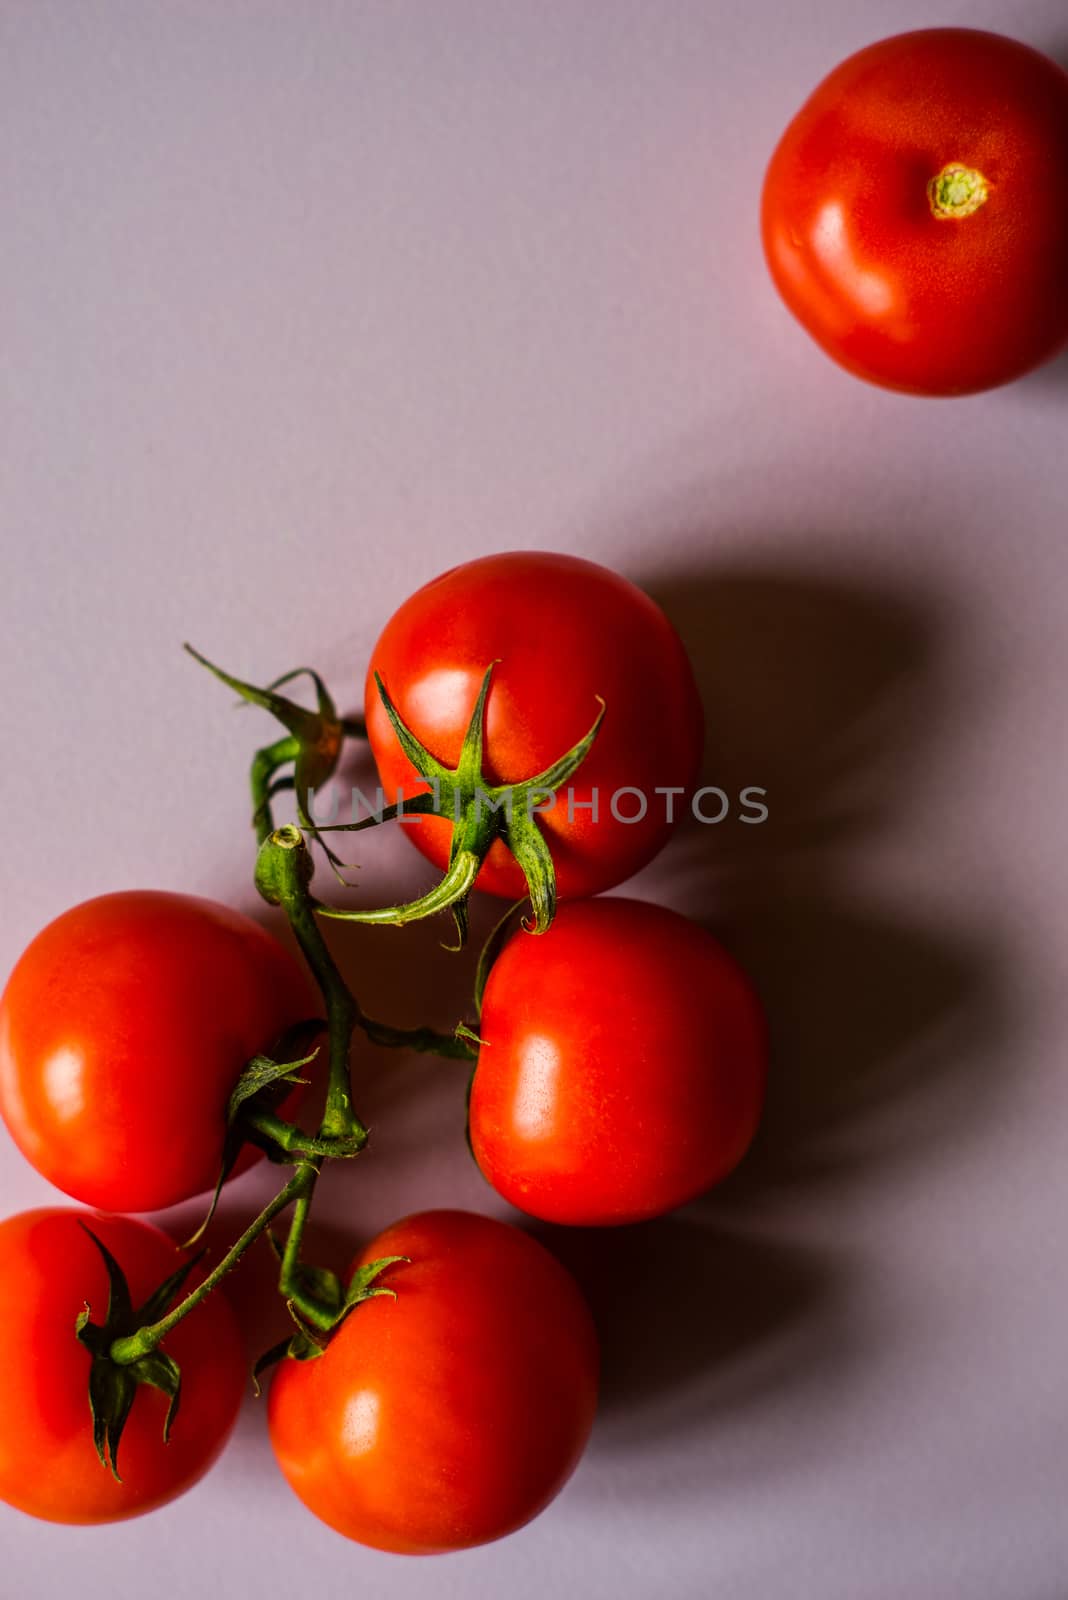 Tomatoes twig on the white background vertical by Deniskarpenkov